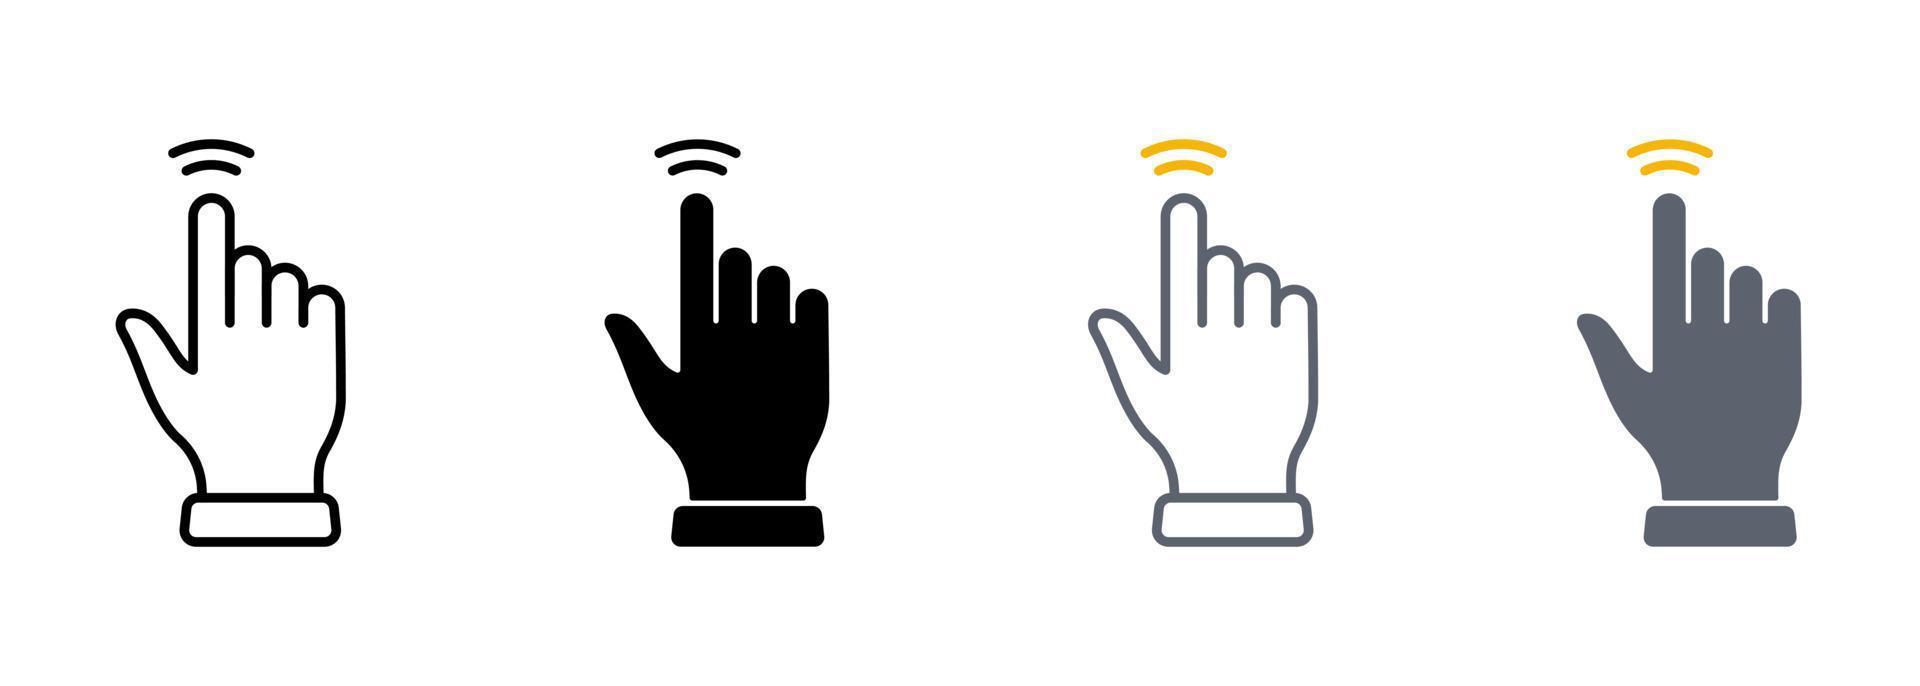 Double Tap Gesture Line and Silhouette Color Icon Set. Hand Cursor of Computer Mouse Pictogram. Pointer Finger Click Press Touch Symbol Collection on White Background. Isolated Vector Illustration.